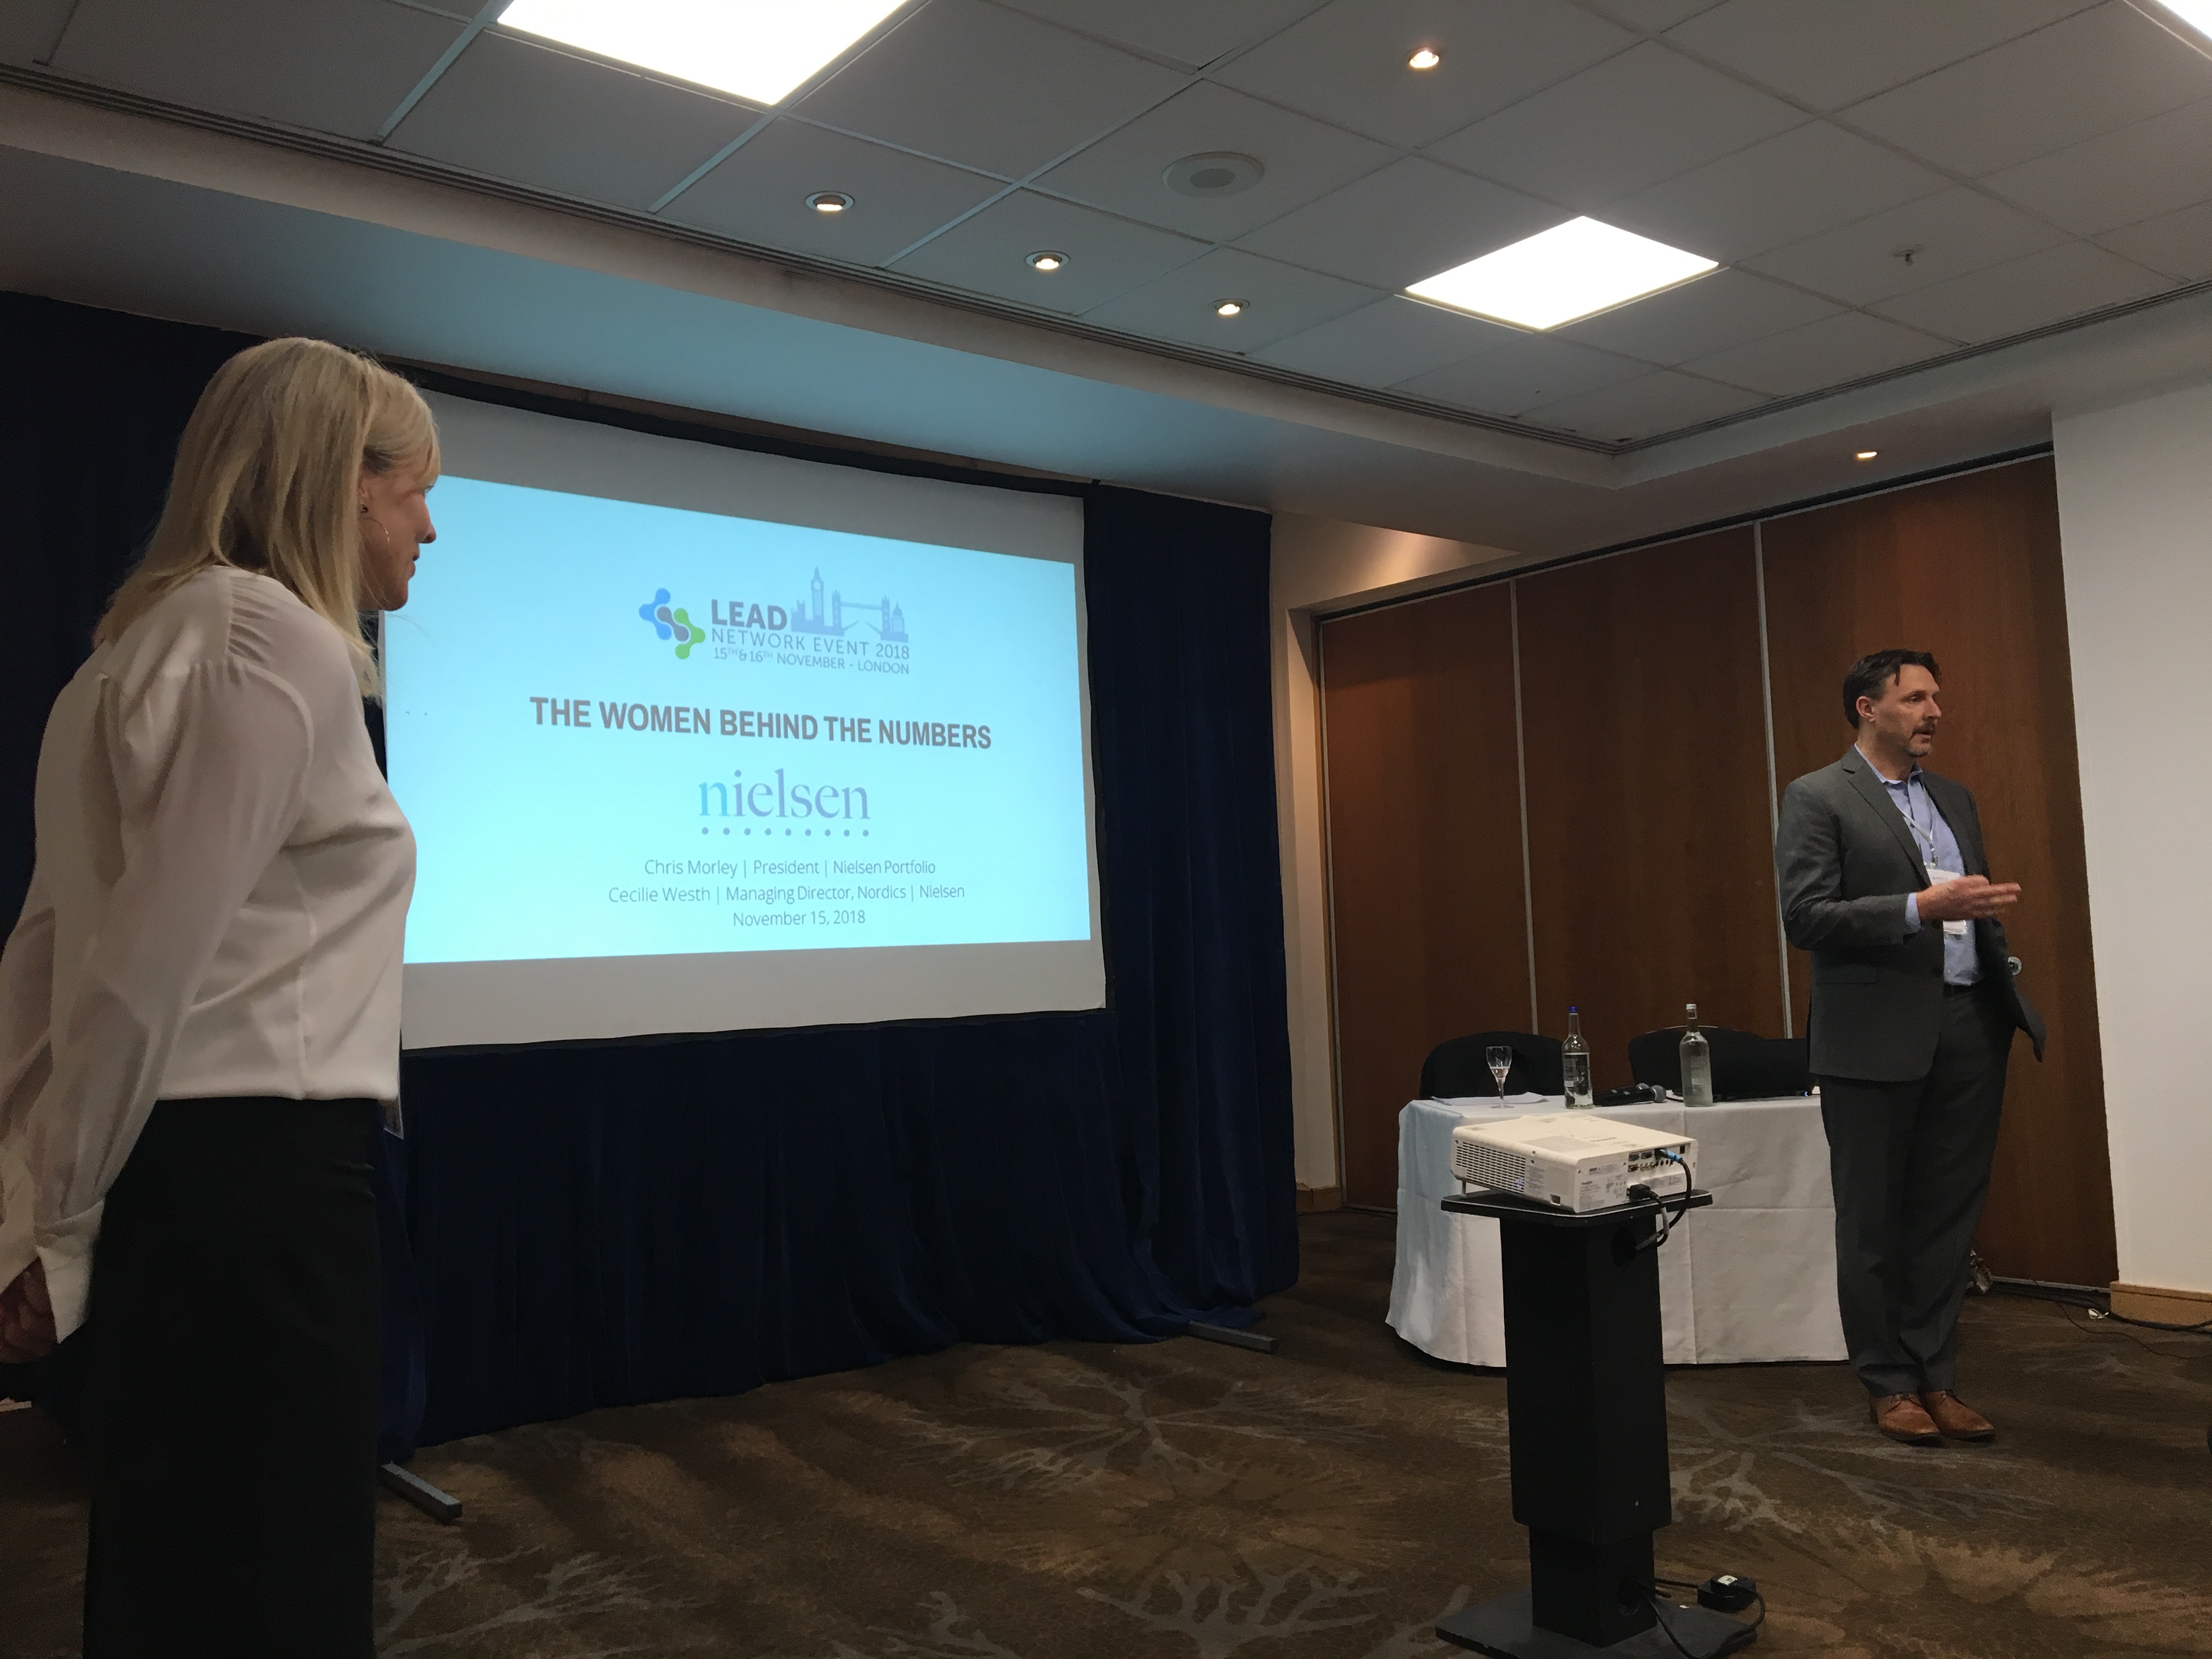 Cecilie Westh (left) and Chris Morley (right) presenting “The Women Behind the Numbers” breakout session. 